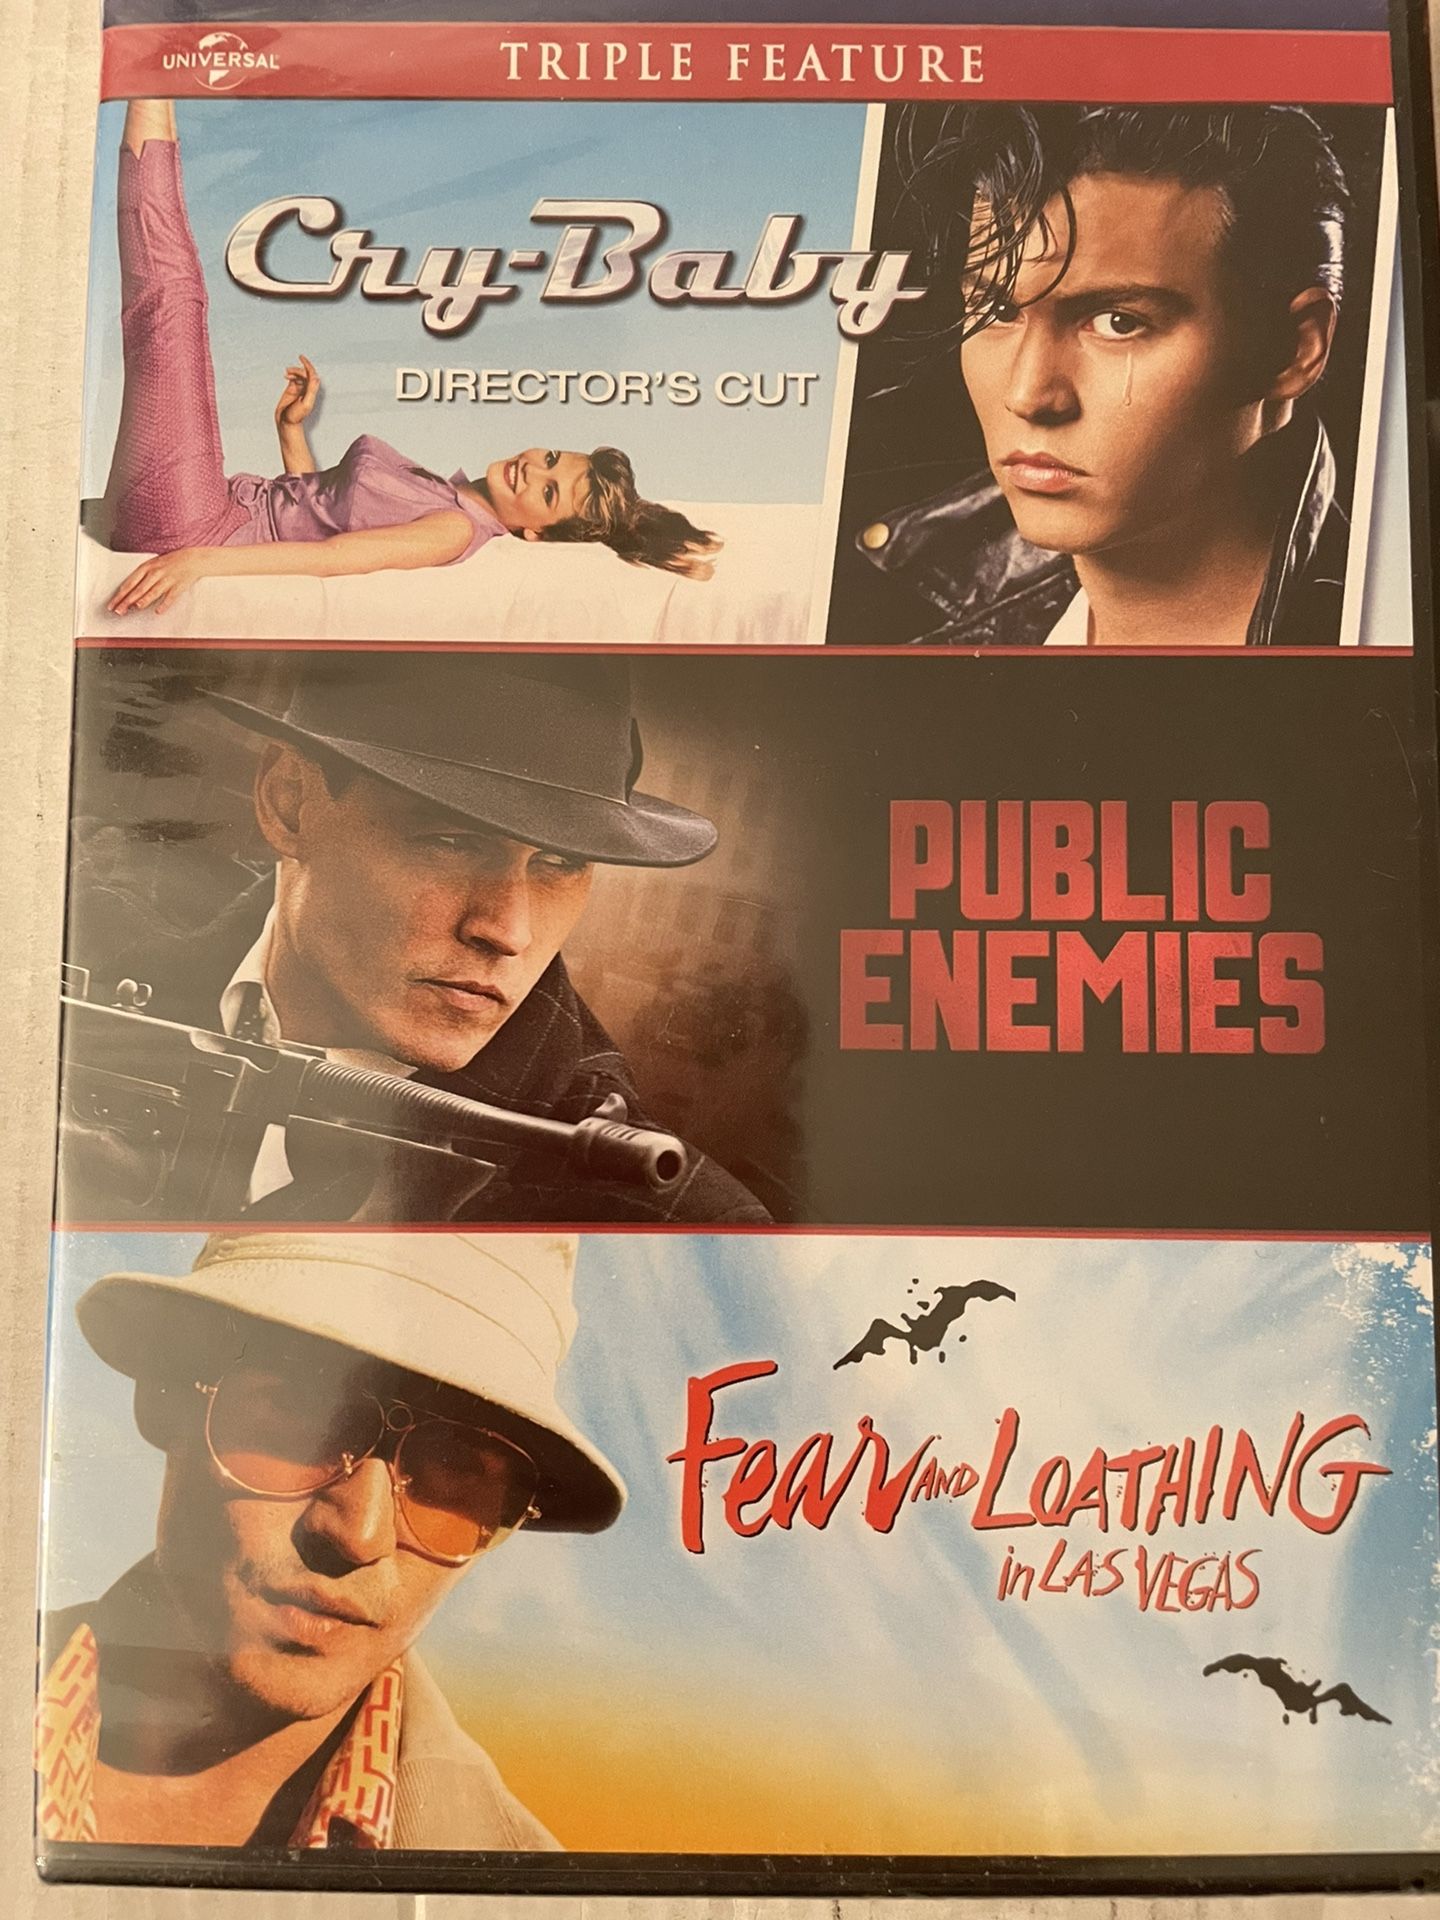 CRY-BABY / PUBLIC ENEMIES / FEAR AND LOATHING IN LAS VEGAS TRIPLE FEATURE (DVD) NEW 